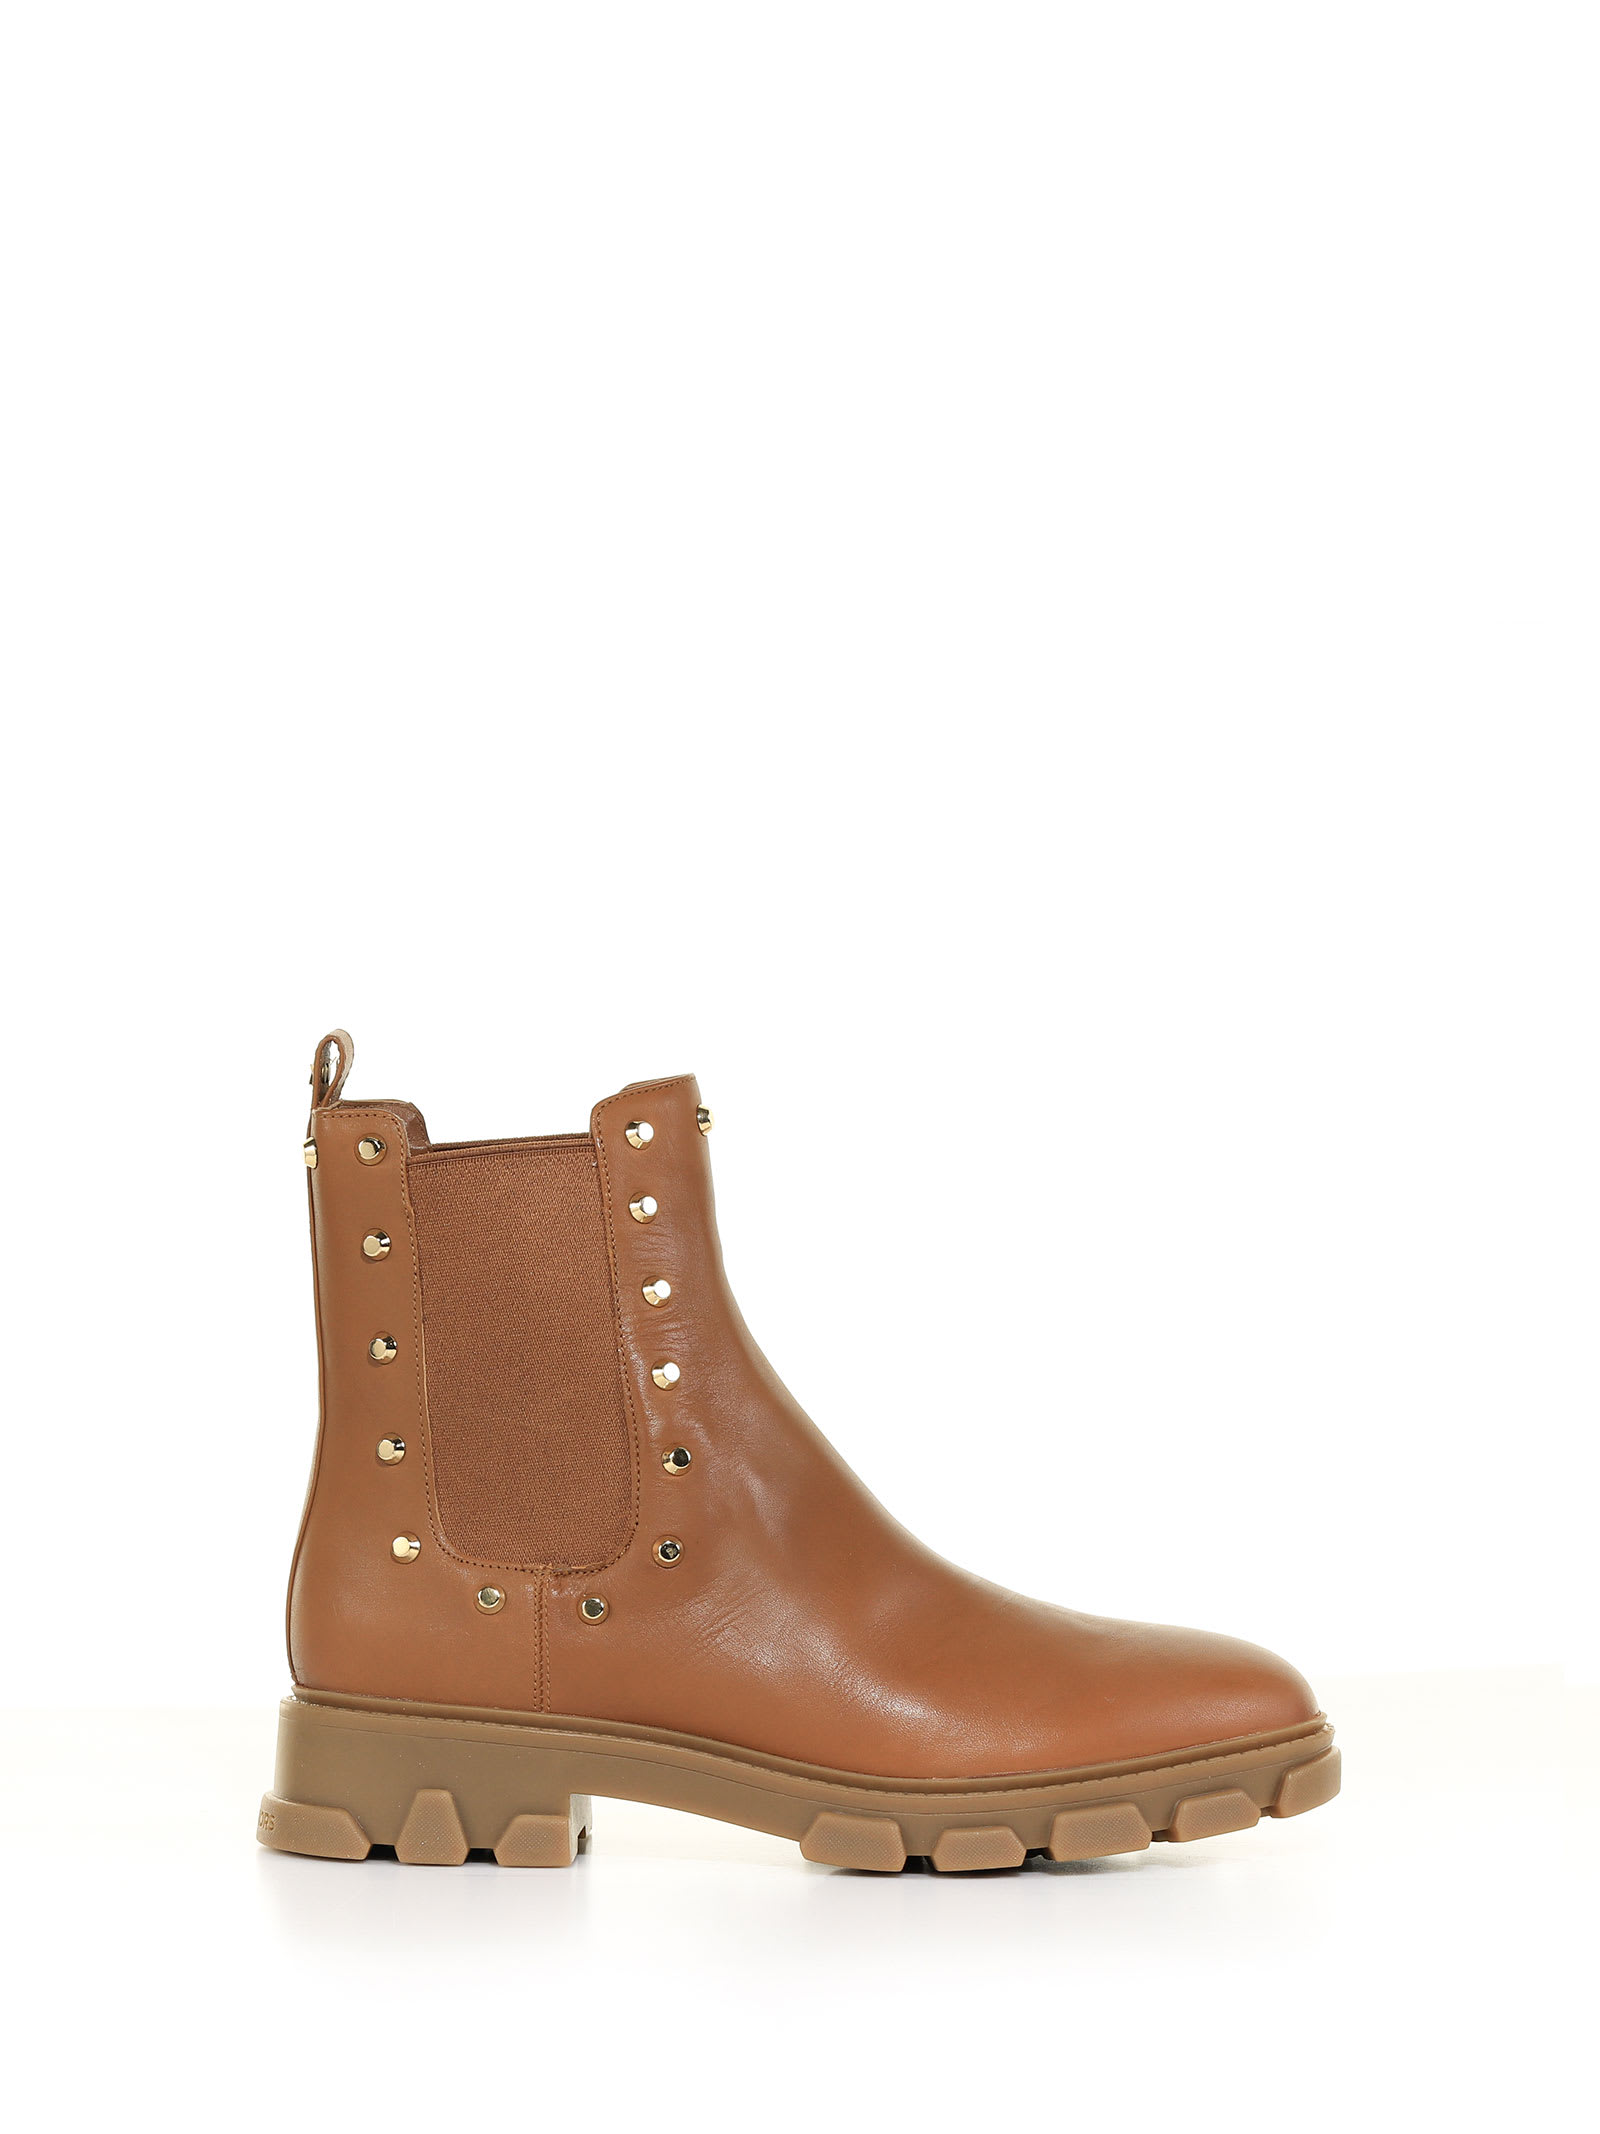 Tol Krimpen Transplanteren Michael Kors Ankle Boot With Studs Detail In Luggage | ModeSens